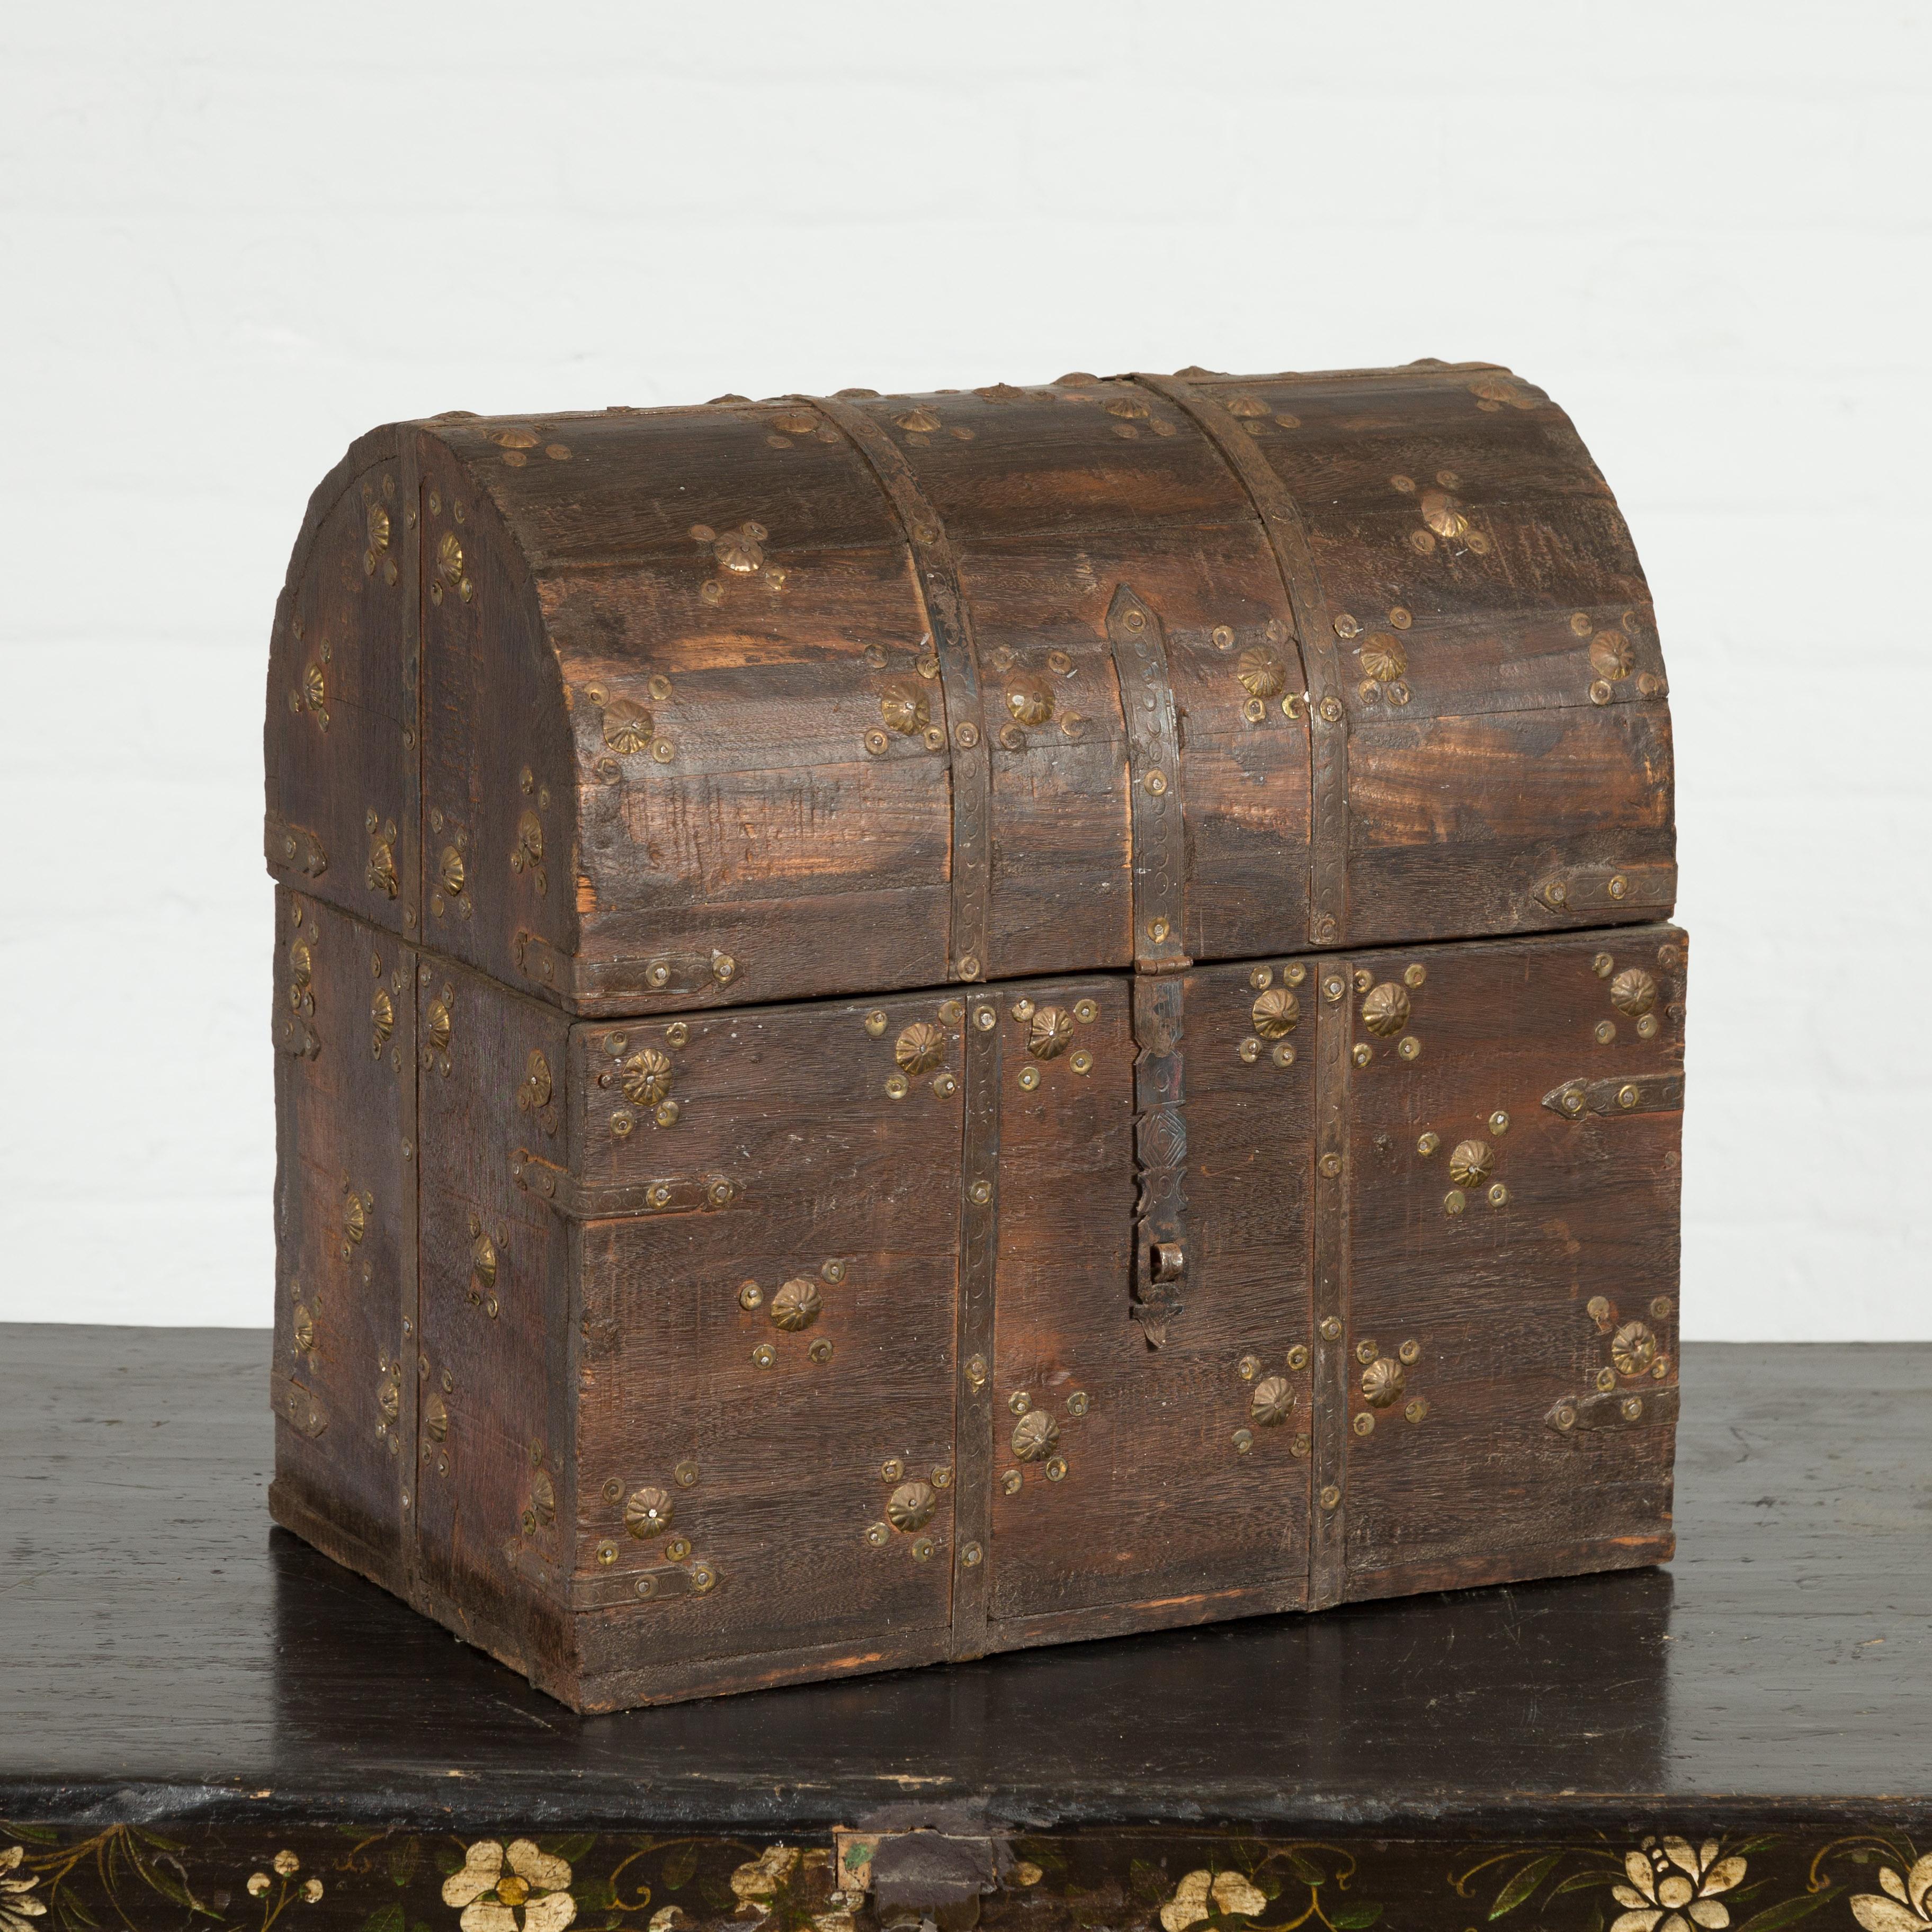 An Indian antique wooden treasure chest from the 19th century, with dome top and metal accents. Created in India during the 19th century, this treasure chest captures our attention with its distressed wooden structure accented with petite gilt metal